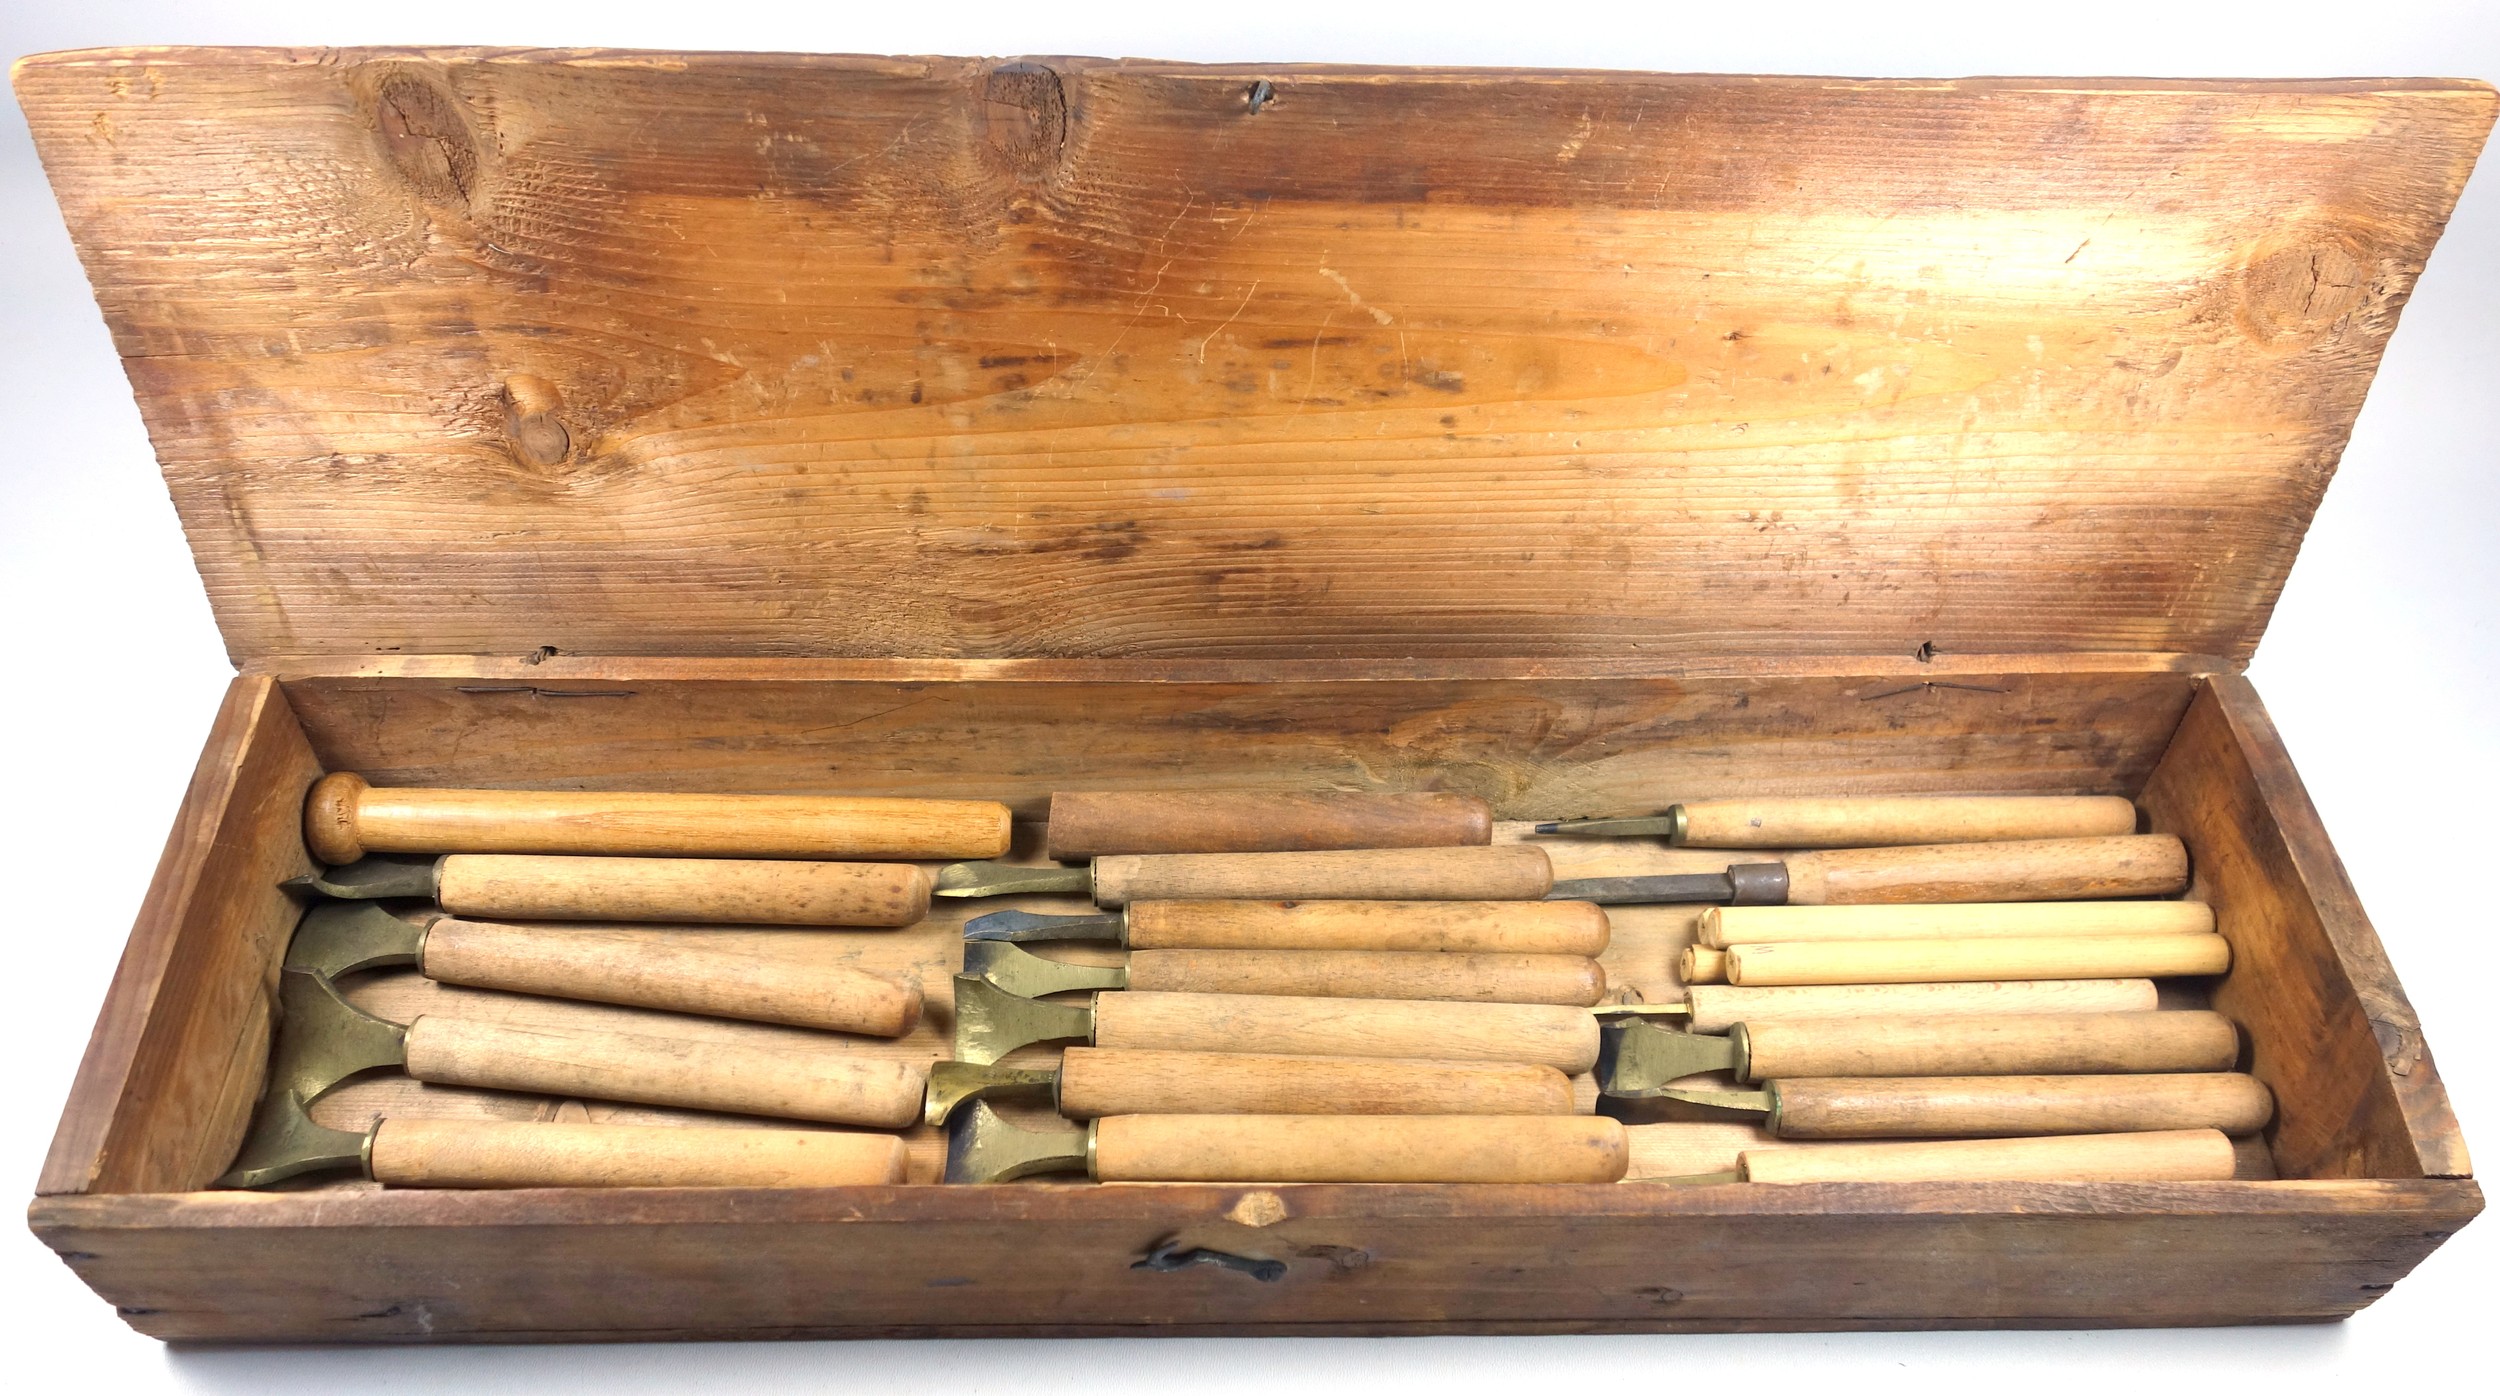 19 gold finishing hand tools comprising pallets and gouges, and 5 spare handles. (24) - Image 3 of 4